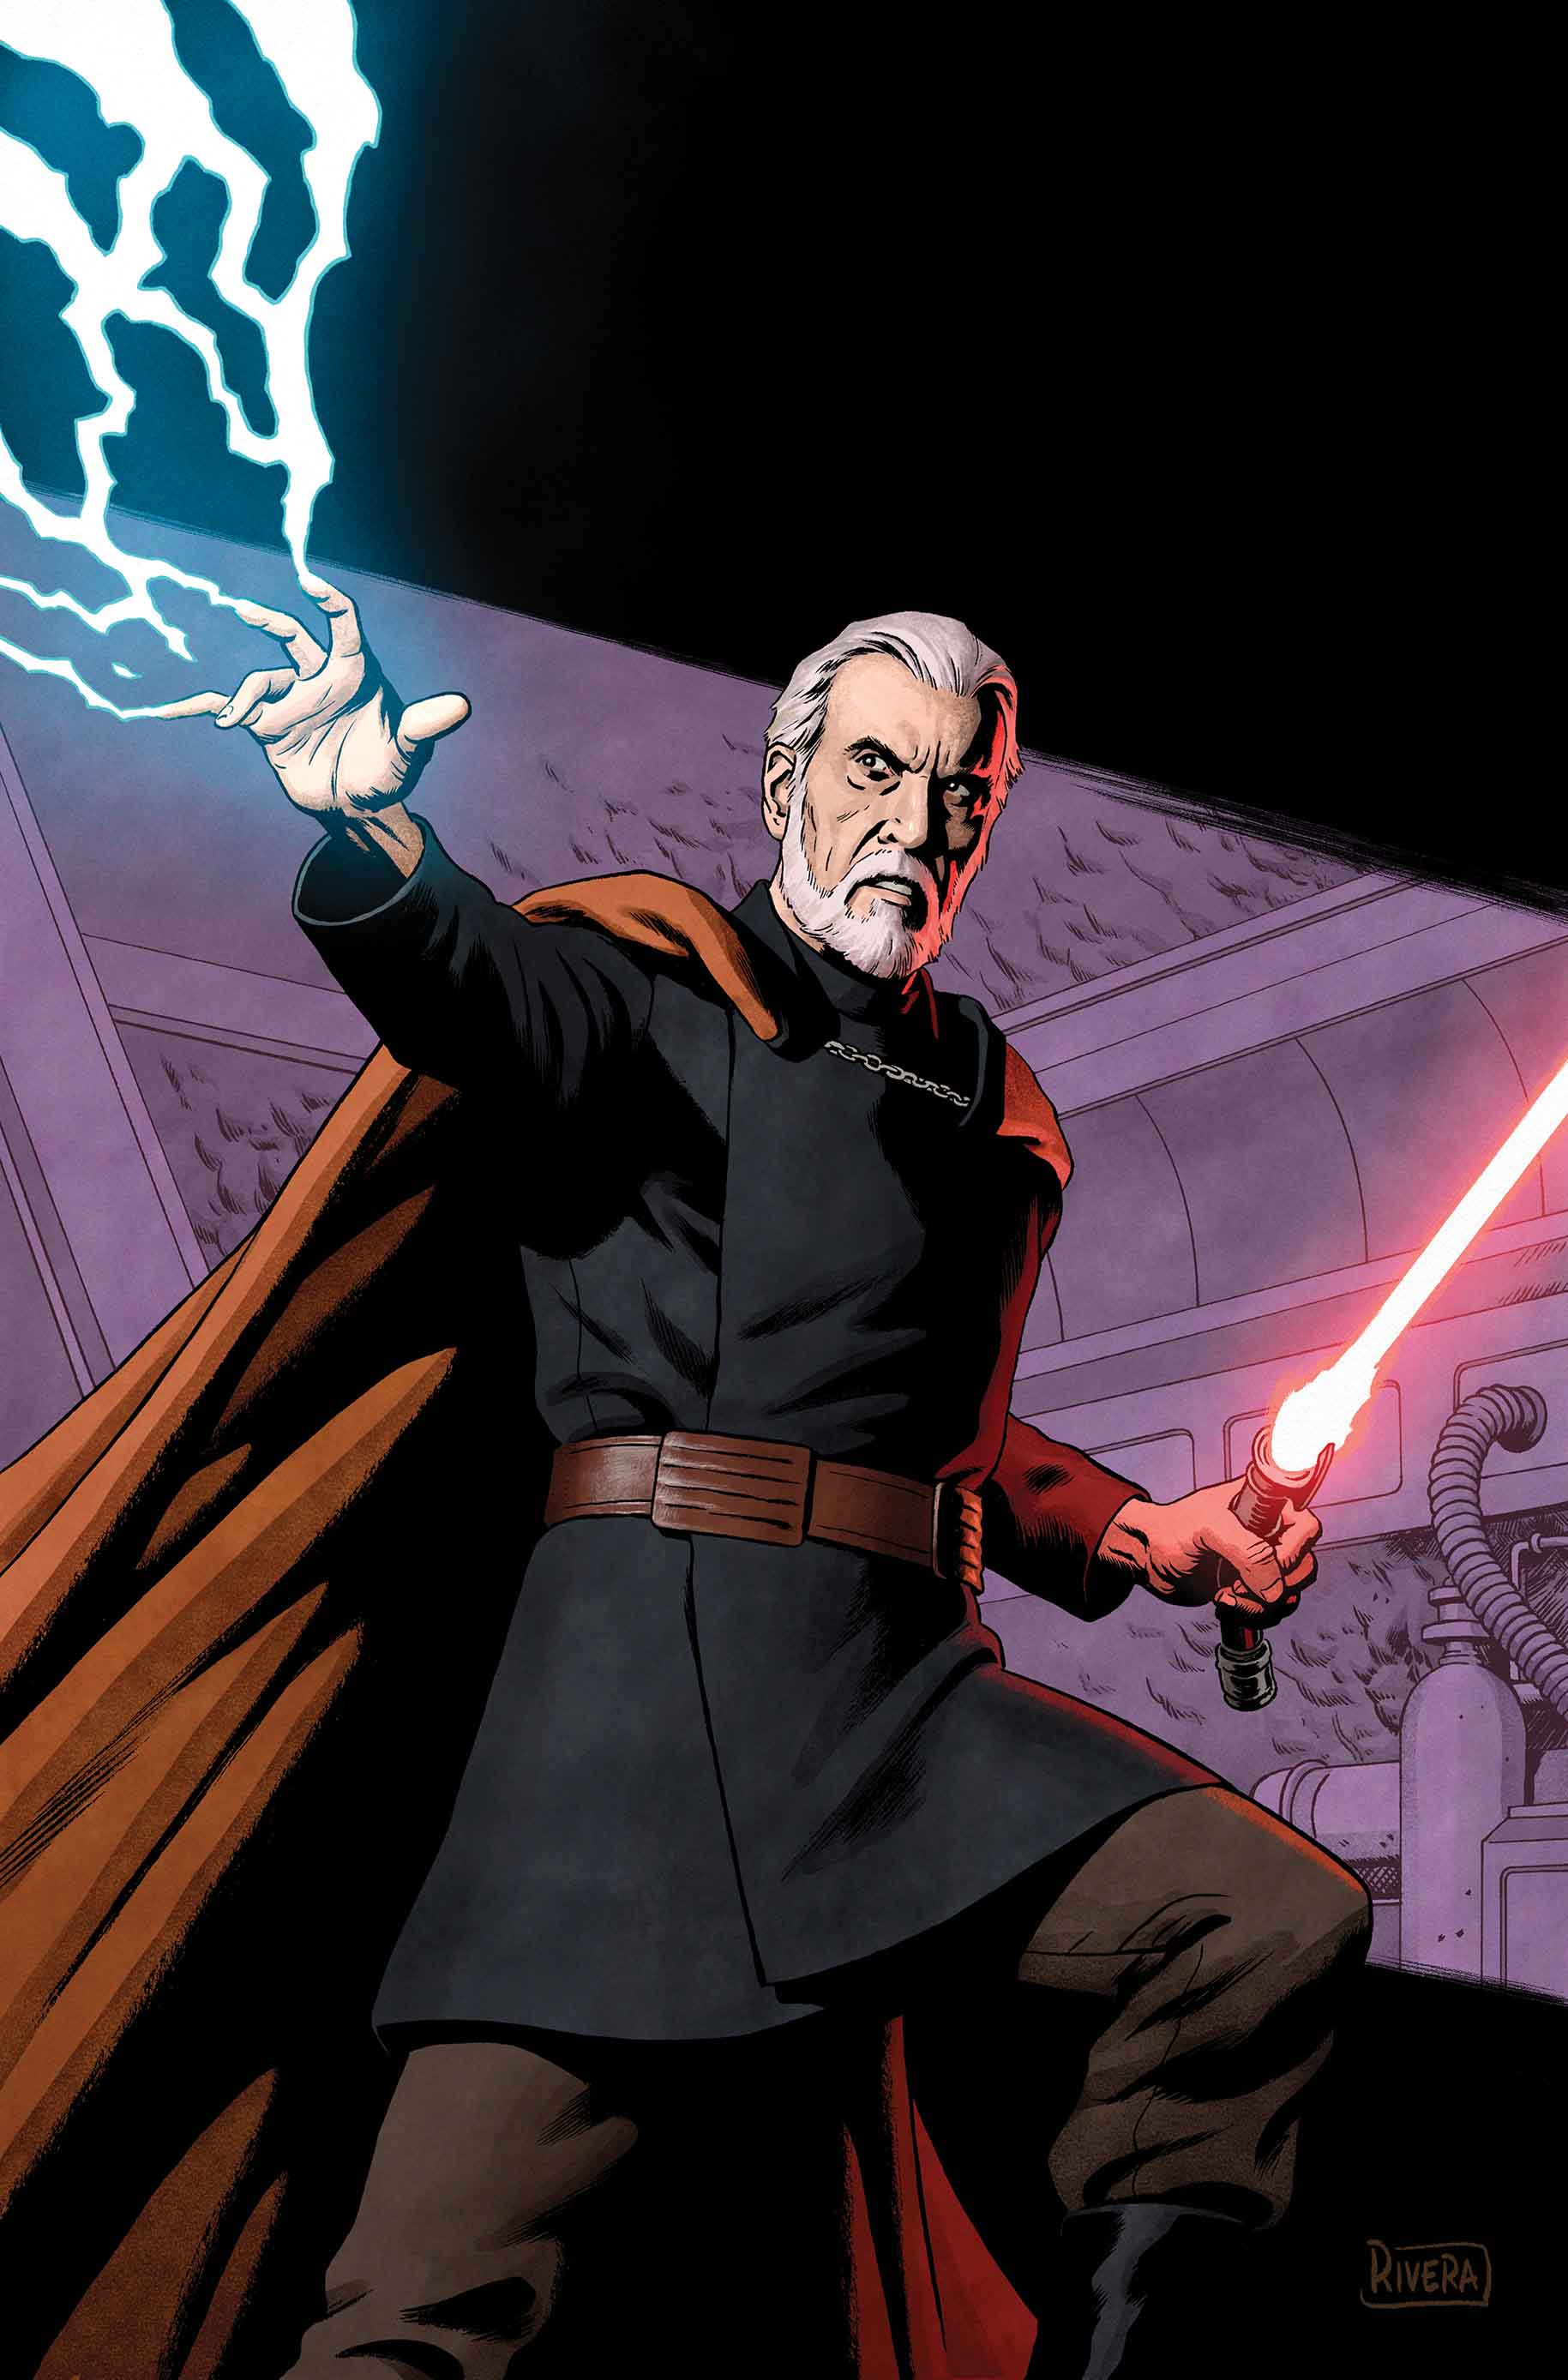 Star Wars: Age of Republic - Count Dooku #1